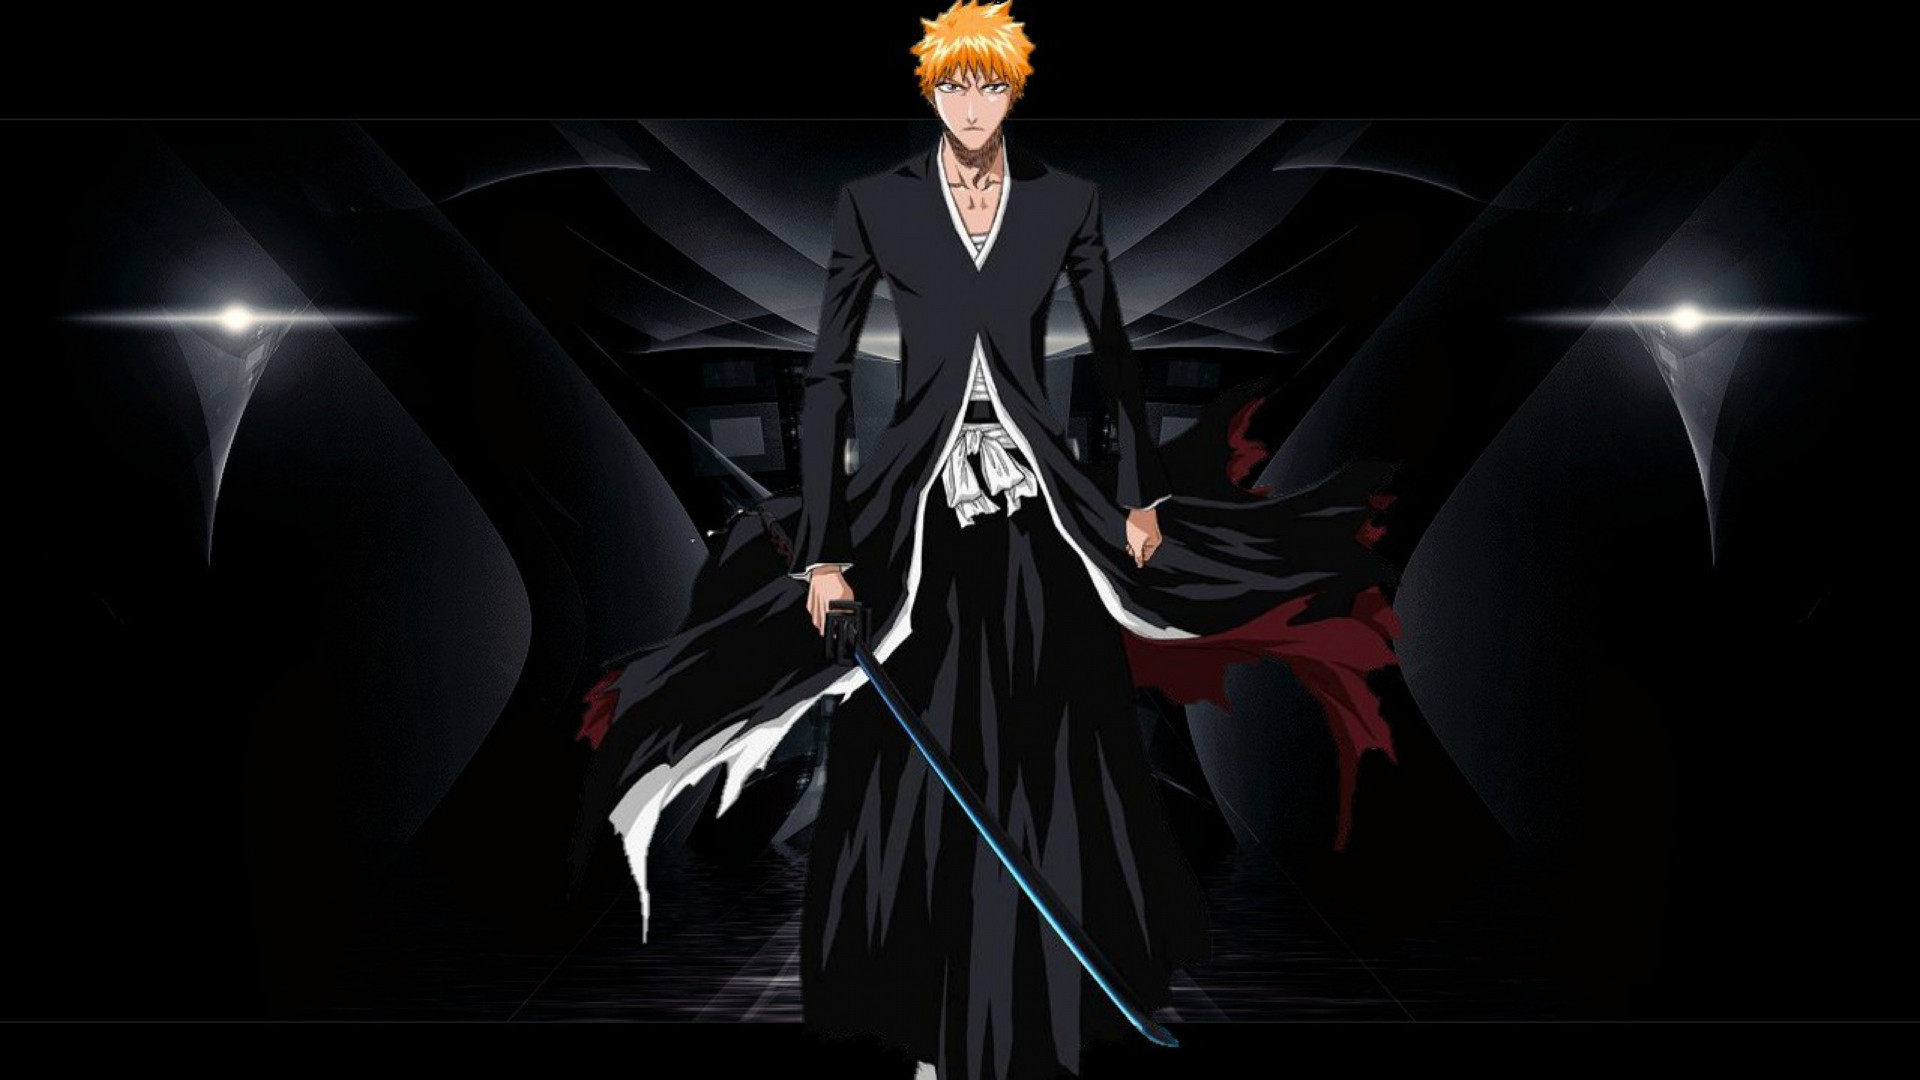 Bleach Anime Wallpapers - Top Free Bleach Anime Backgrounds